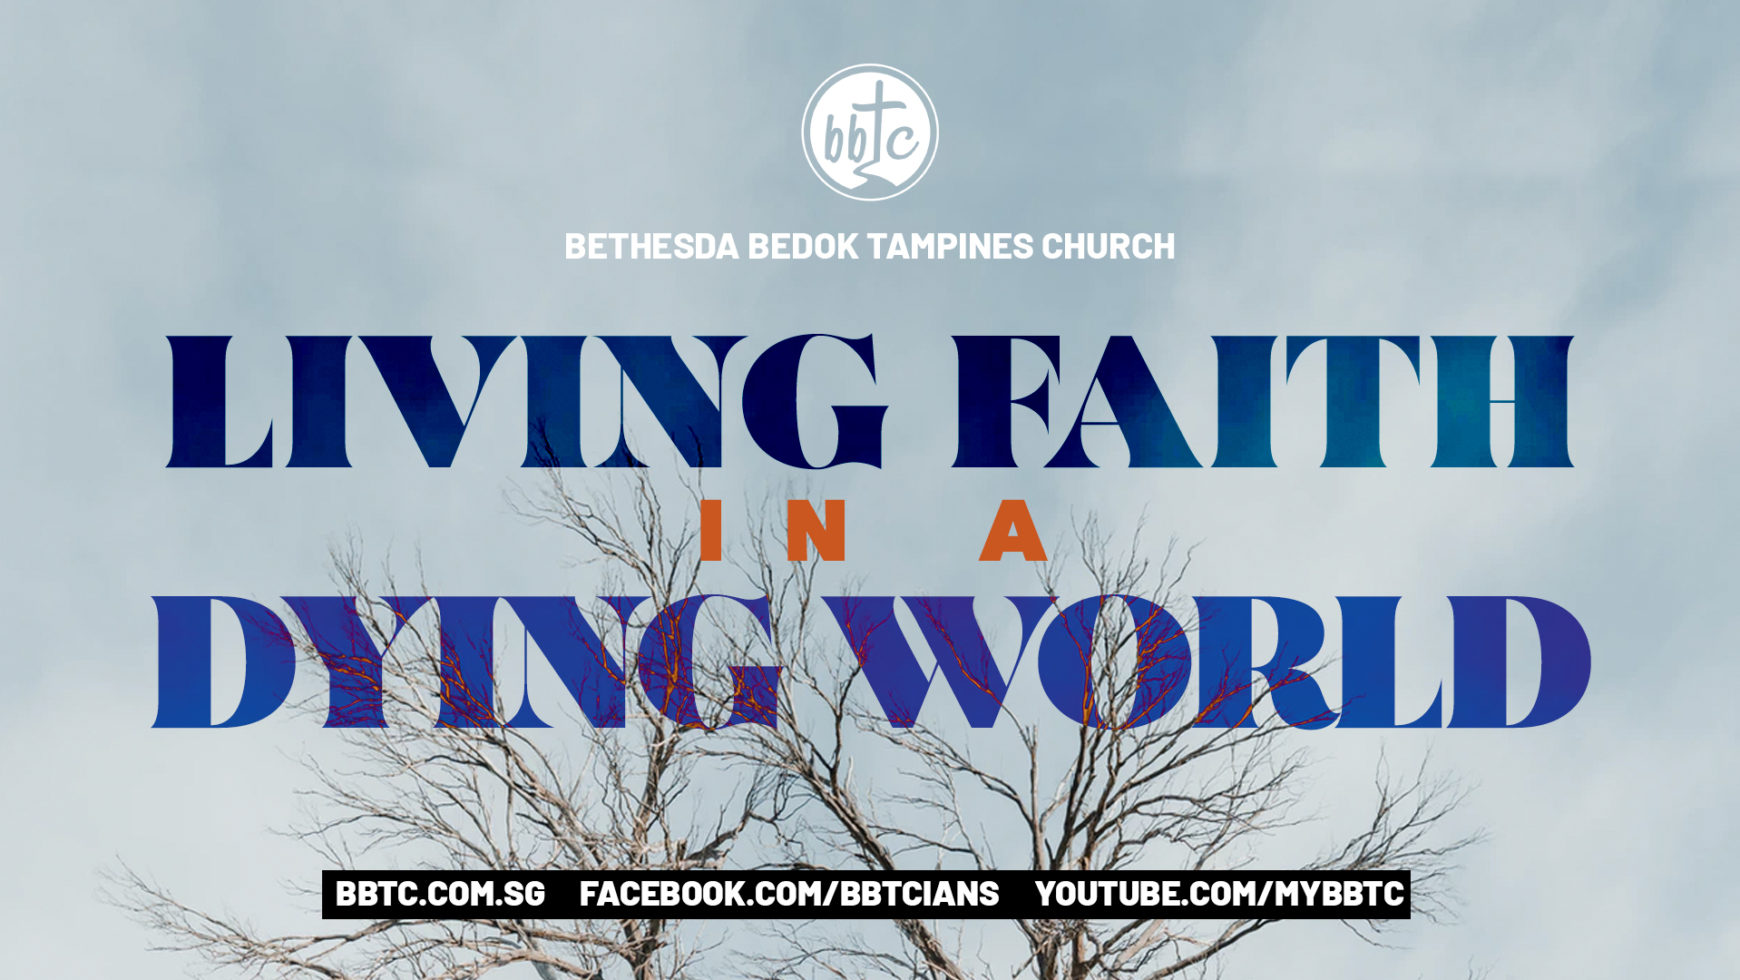 LIVING FAITH IN A DYING WORLD